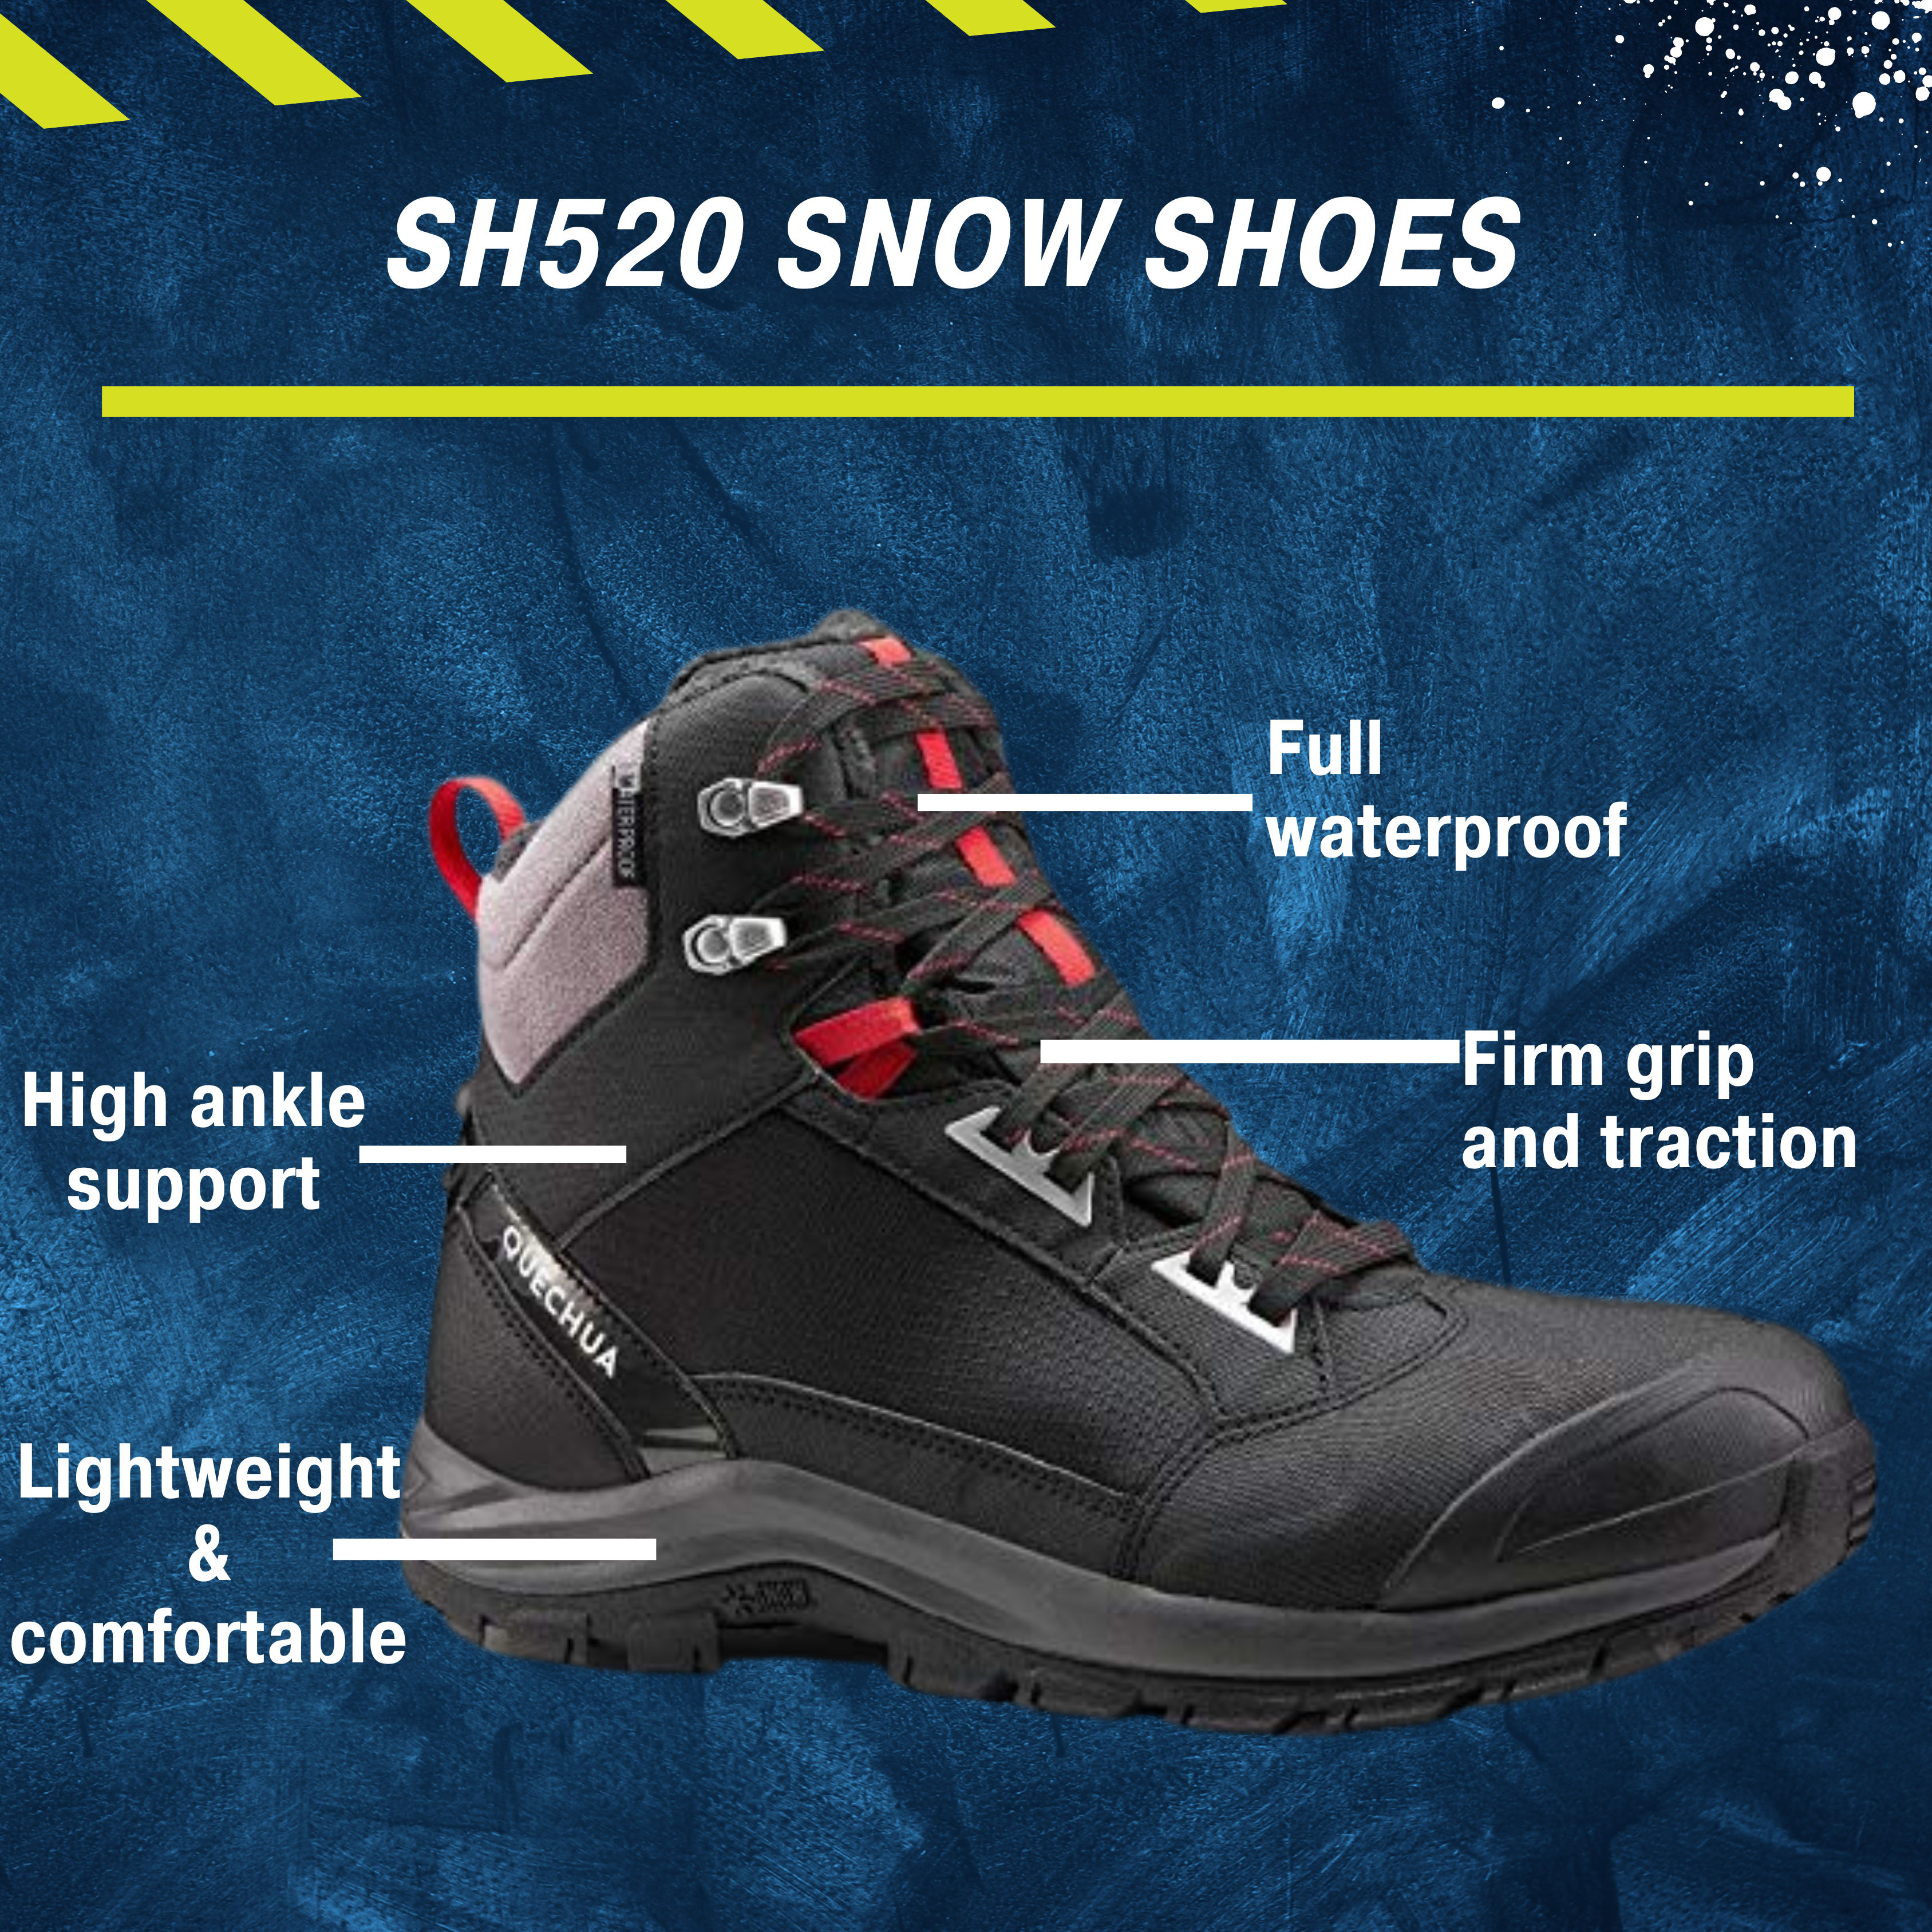 These are product images of SH520 Snow Shoes on rent by SharePal in Bangalore.